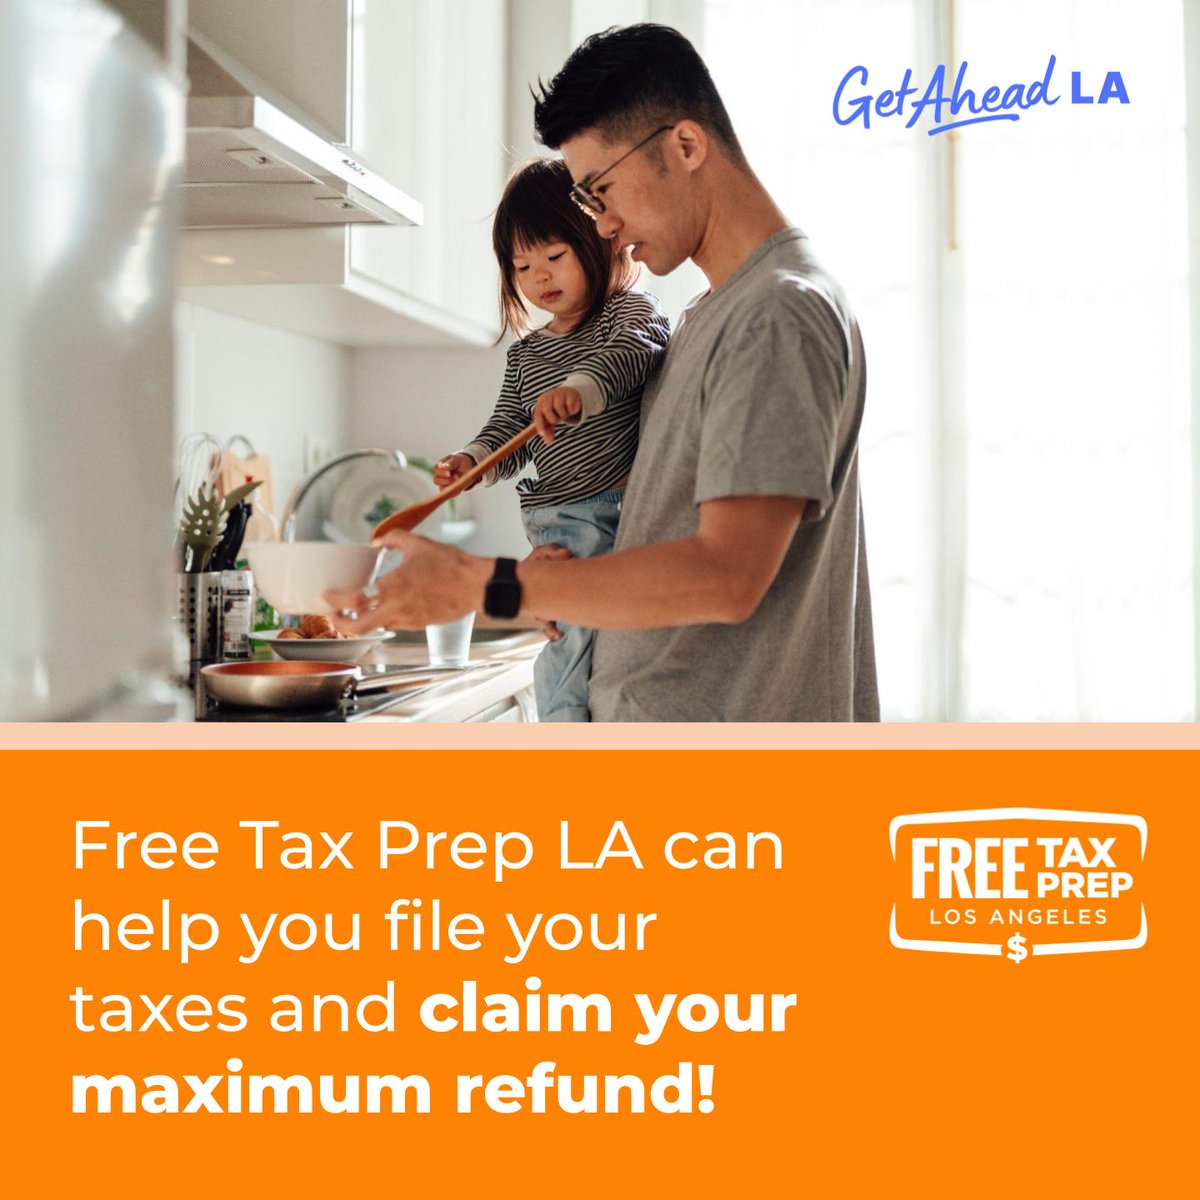 Didn't file your taxes by April 15? No problem! 

IRS-certified tax experts are here to help you file your return and claim your refund without penalty. All you have to do is go to FreeTaxPrepLA.org to make an appointment. 

Get started today! #freetaxprepla